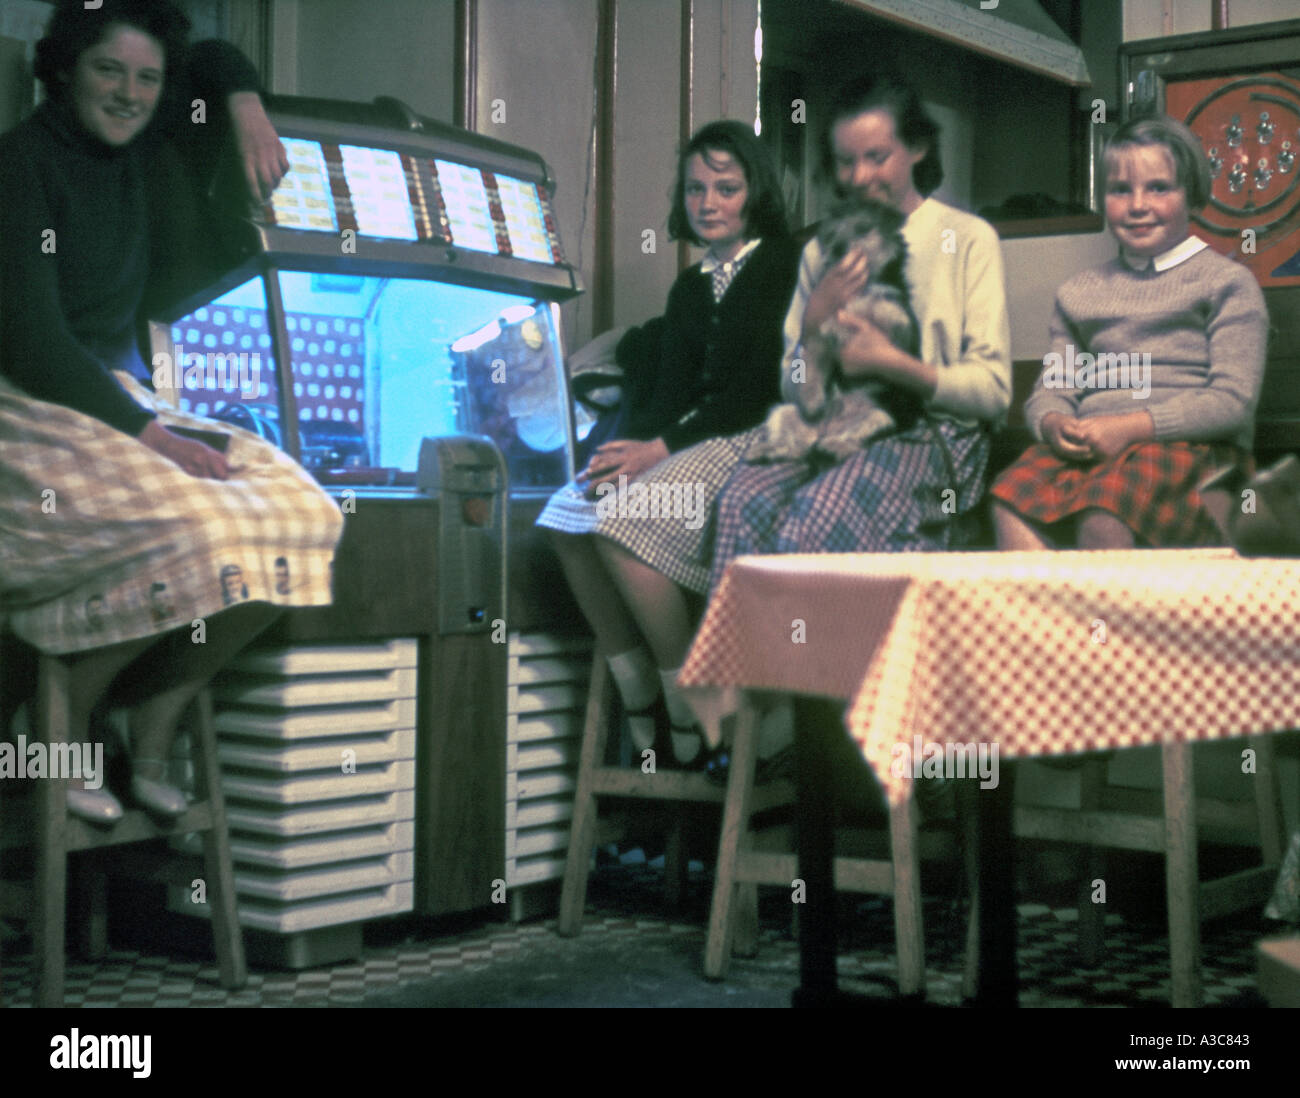 Young teenage girls sitting Around the Jukebox 1950s early 1960s, London, England Stock Photo